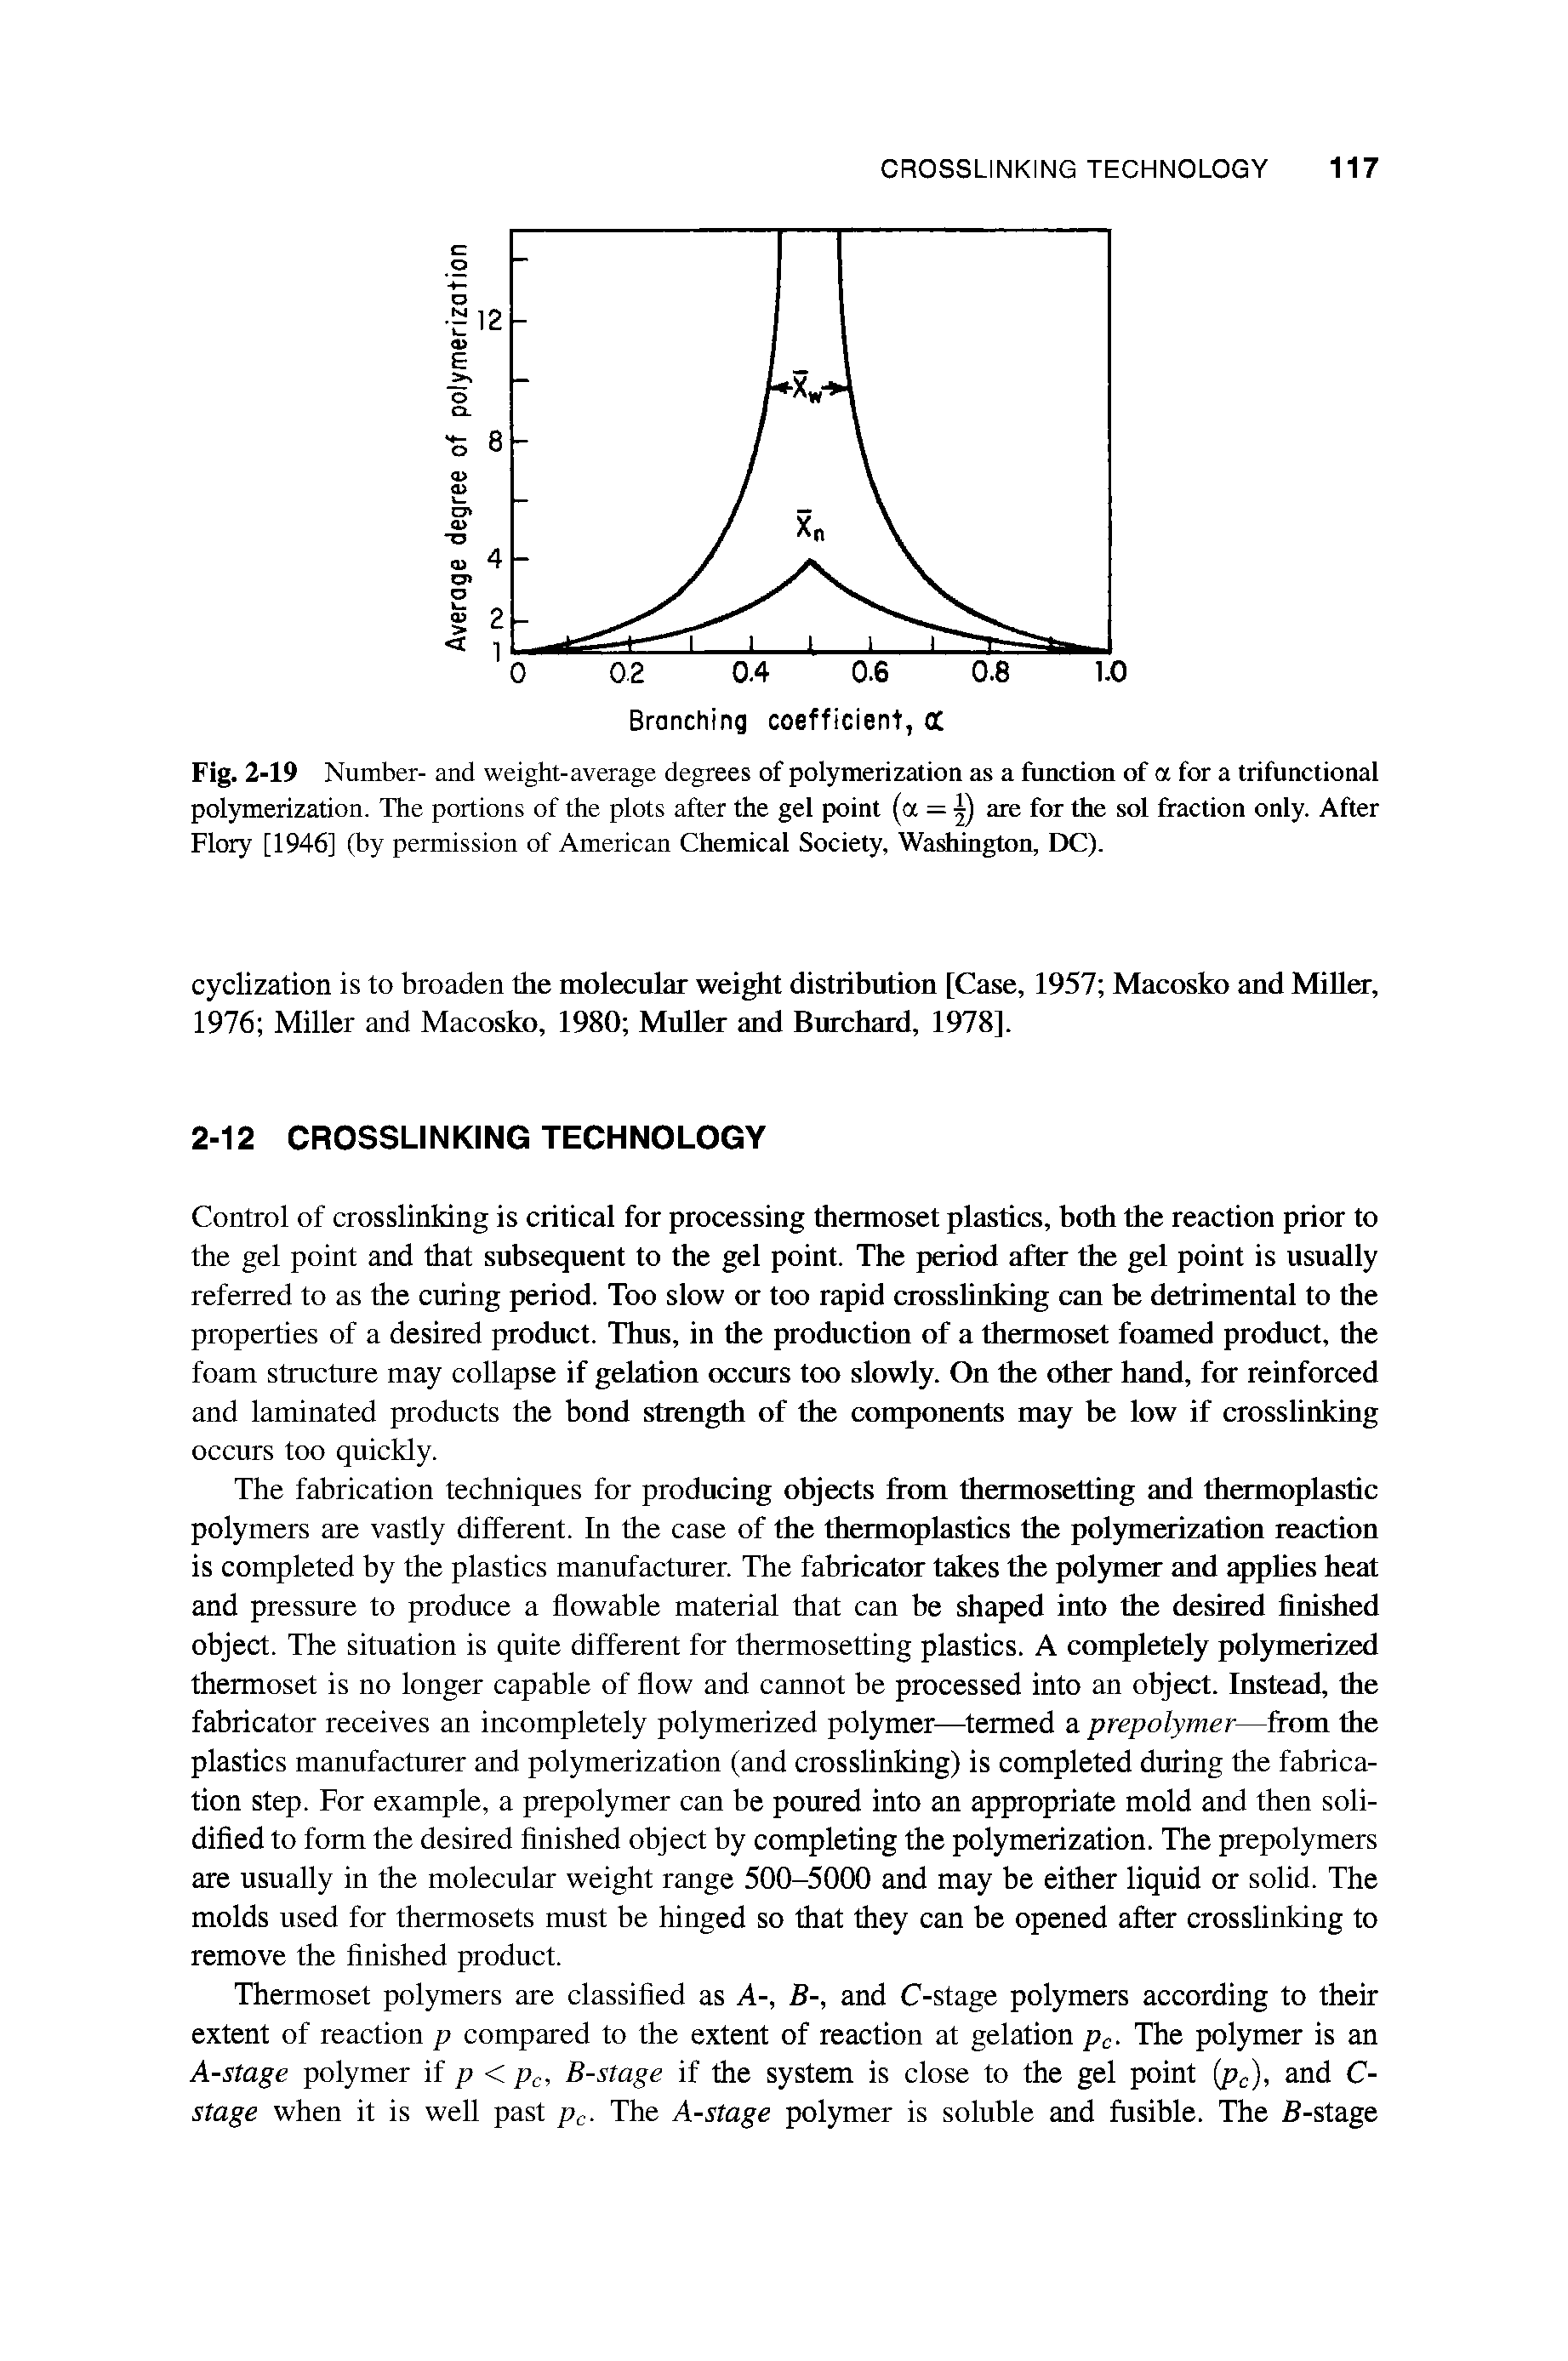 Fig. 2-19 Number- and weight-average degrees of polymerization as a function of a for a trifunctional polymerization. The portions of the plots after the gel point (a = 5) are for the sol fraction only. After Flory [1946] (by permission of American Chemical Society, Washington, DC).